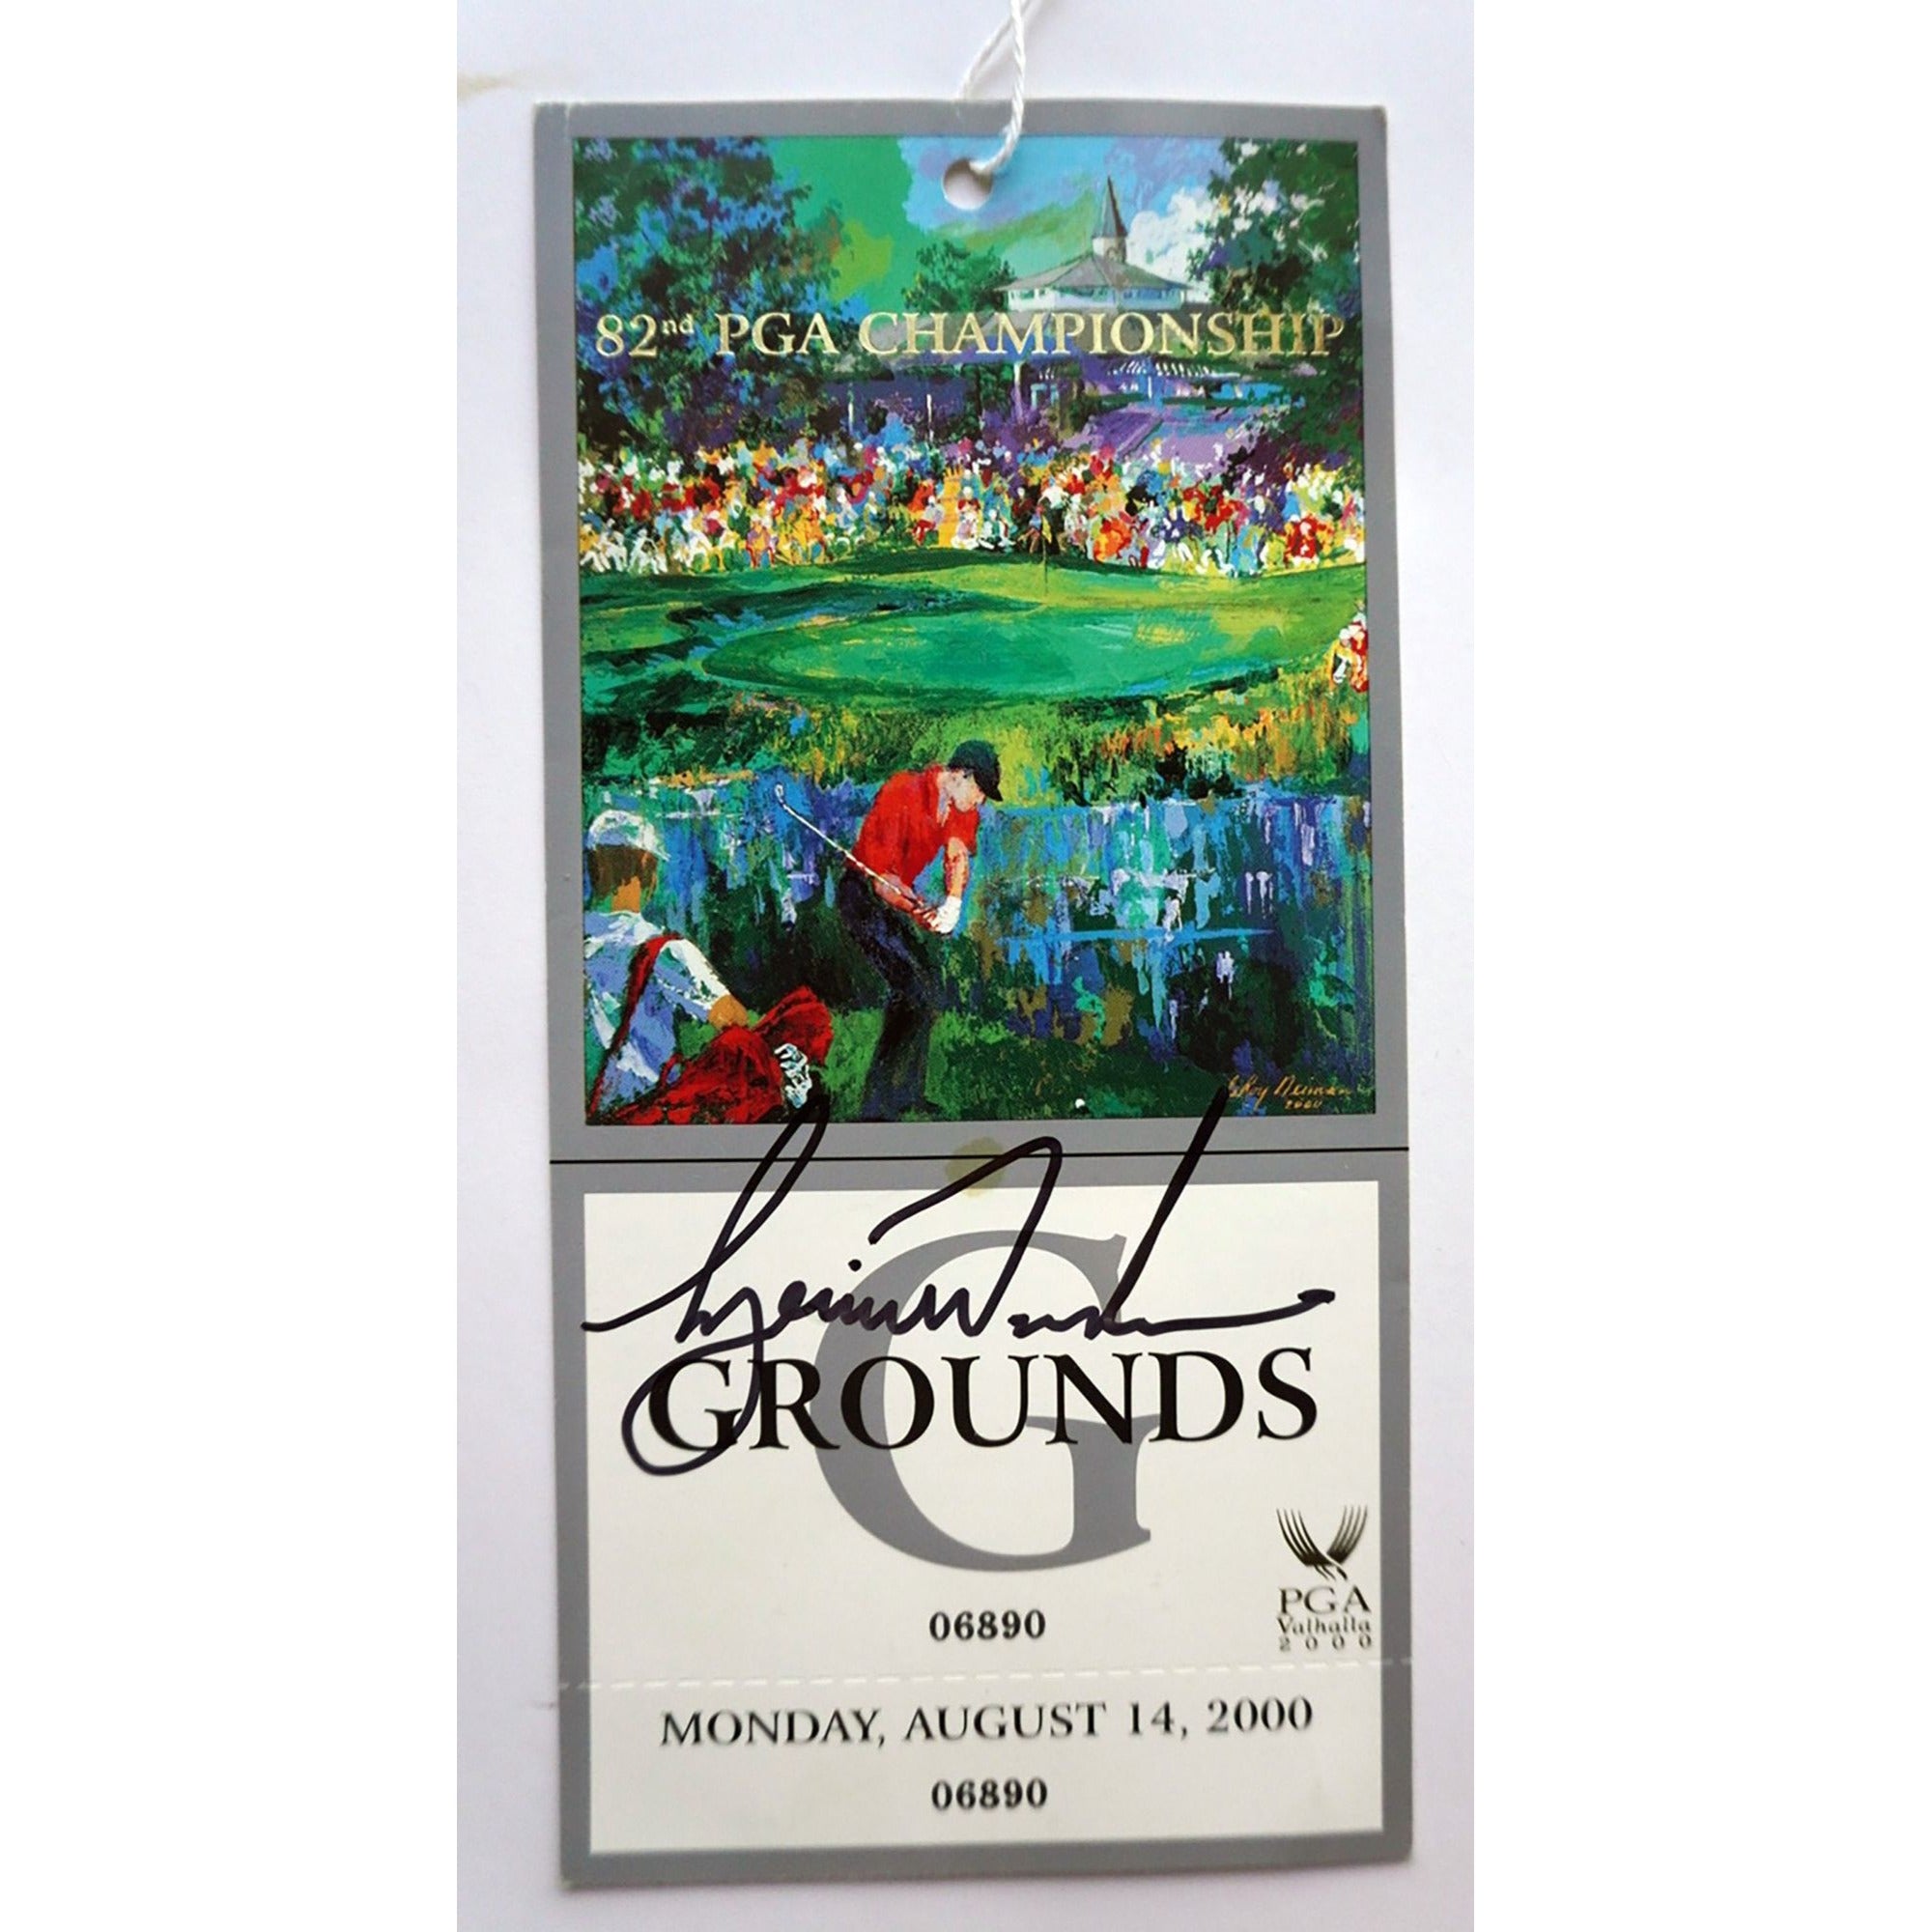 Tiger Woods 2000 PGA Championship signed ticket with proof